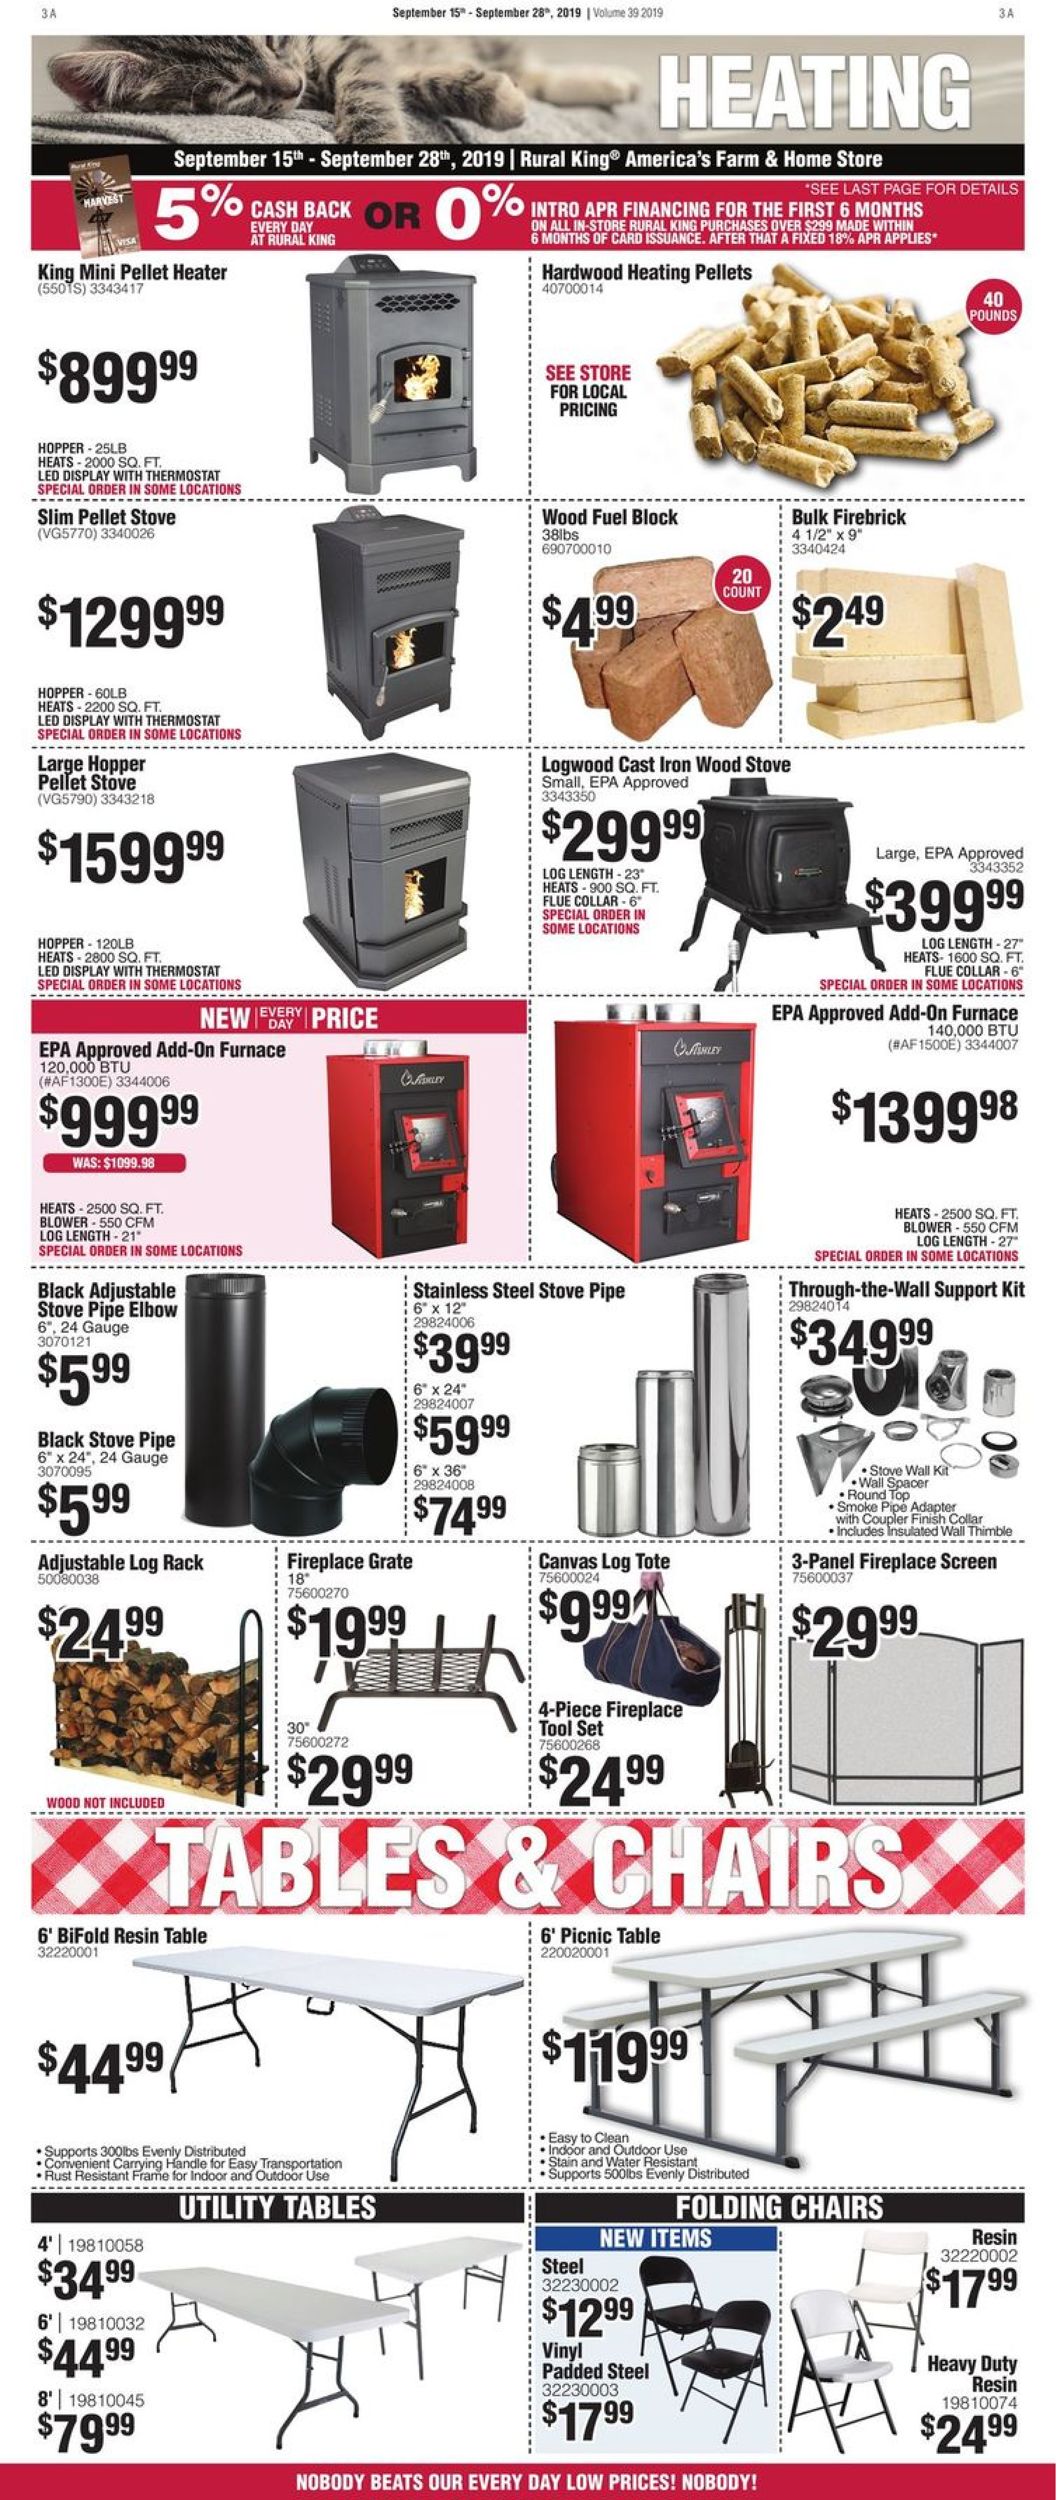 Rural King Current weekly ad 09/15 - 09/28/2019 [4] - frequent-ads.com